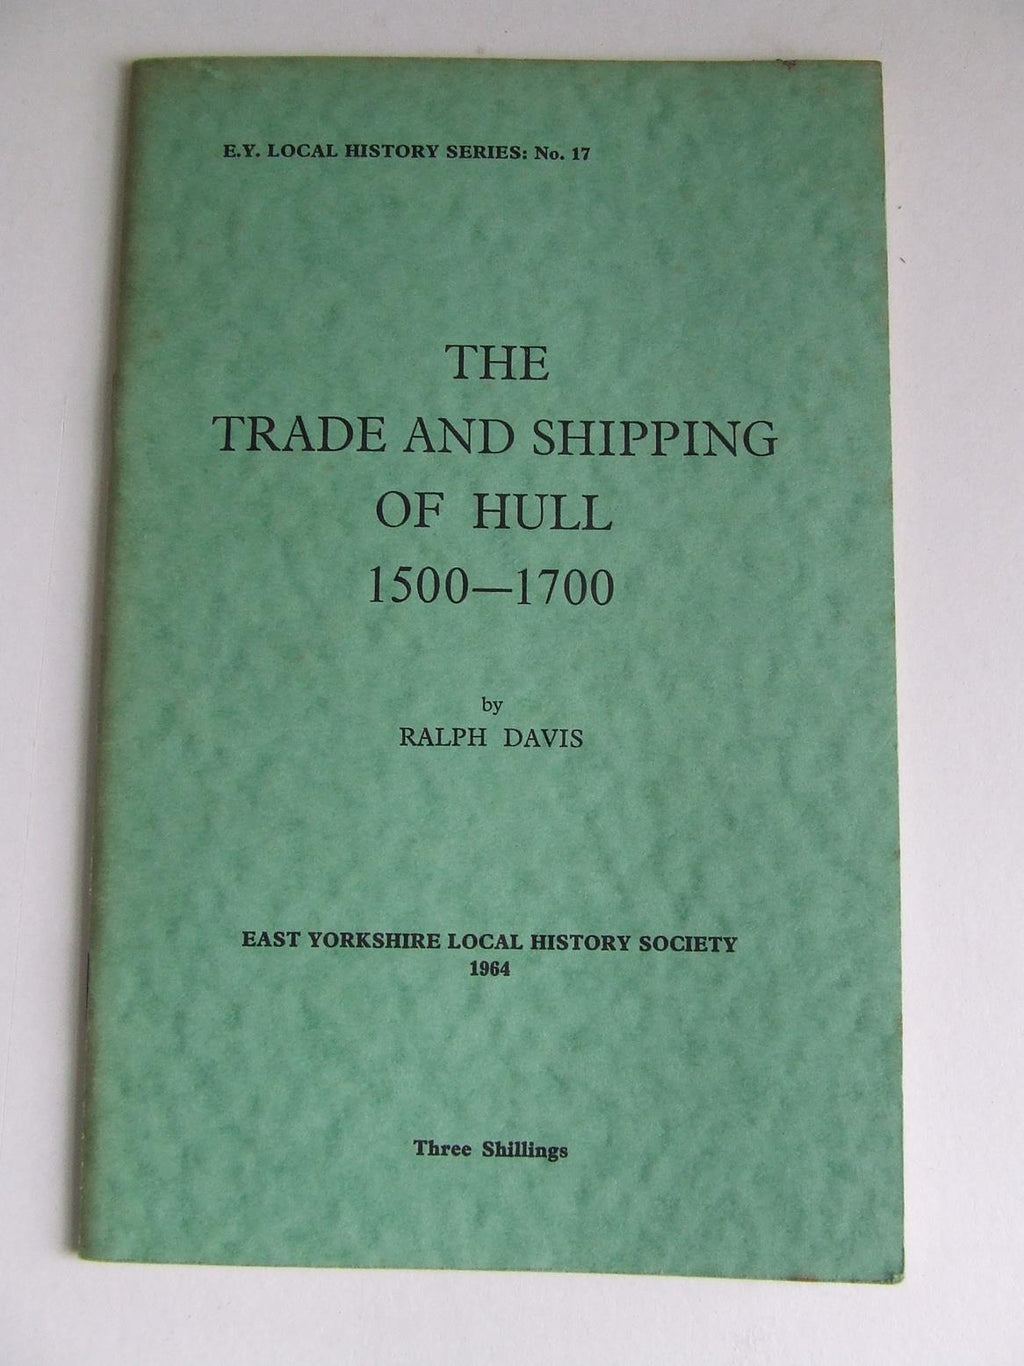 The Trade and Shipping of Hull 1500-1700